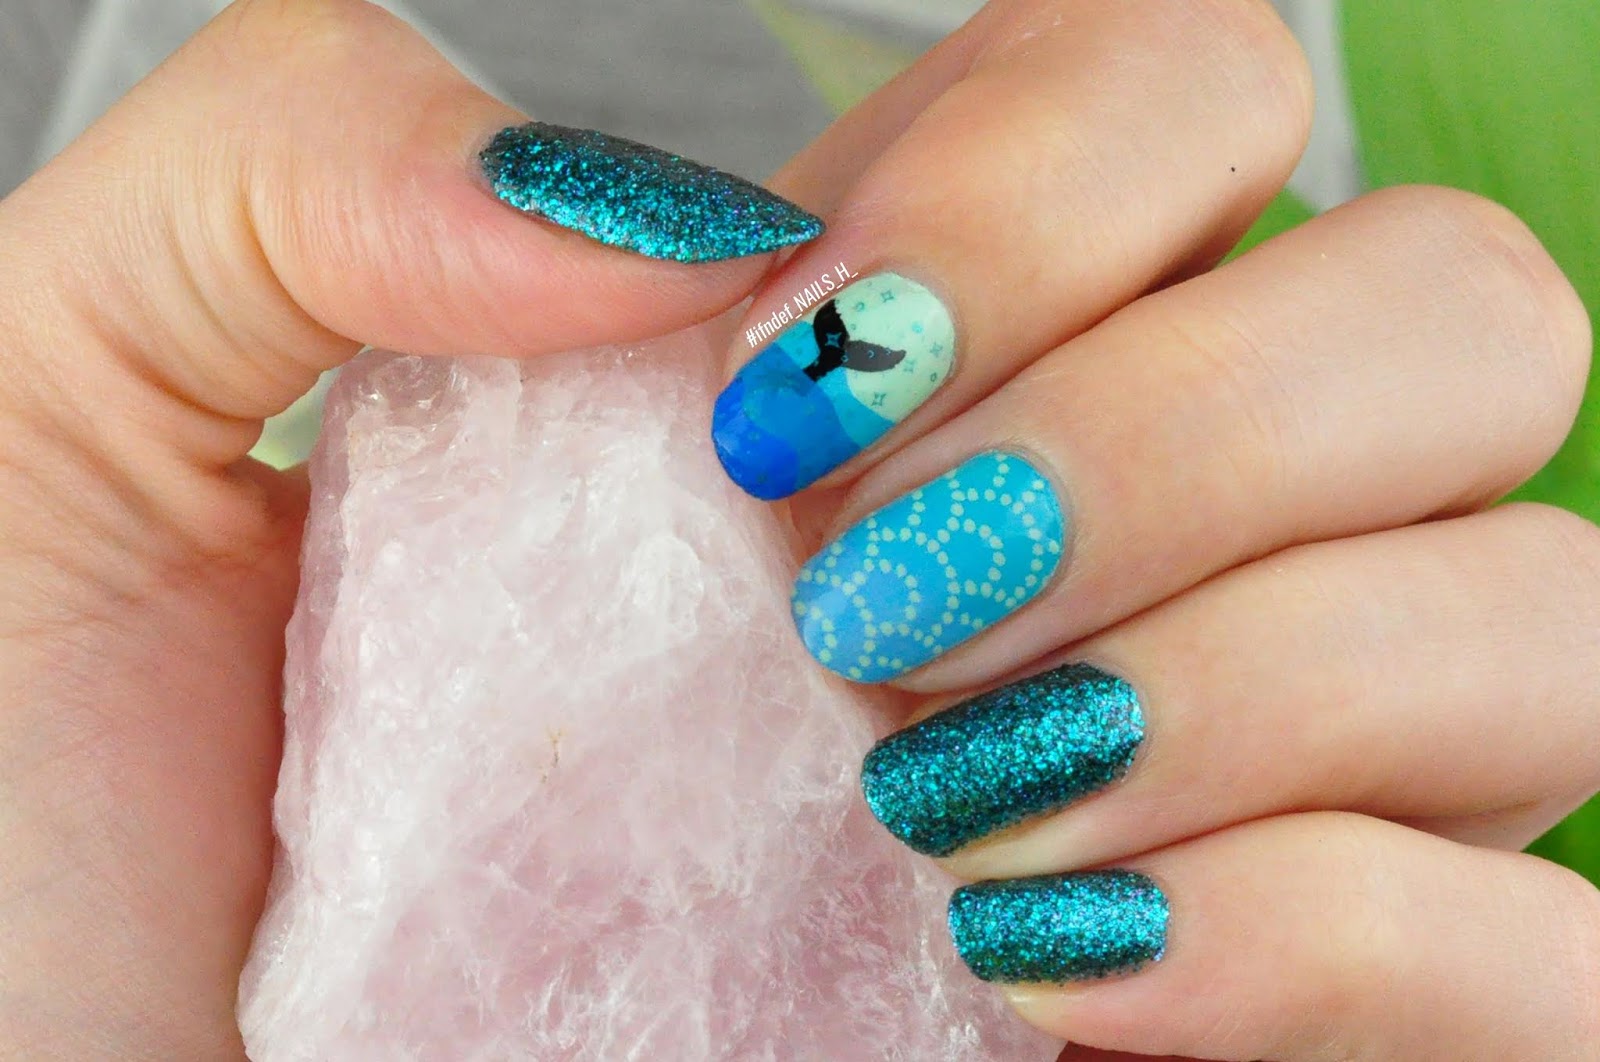 Mermaid Chrome Nail Designs for Short Nails - wide 3